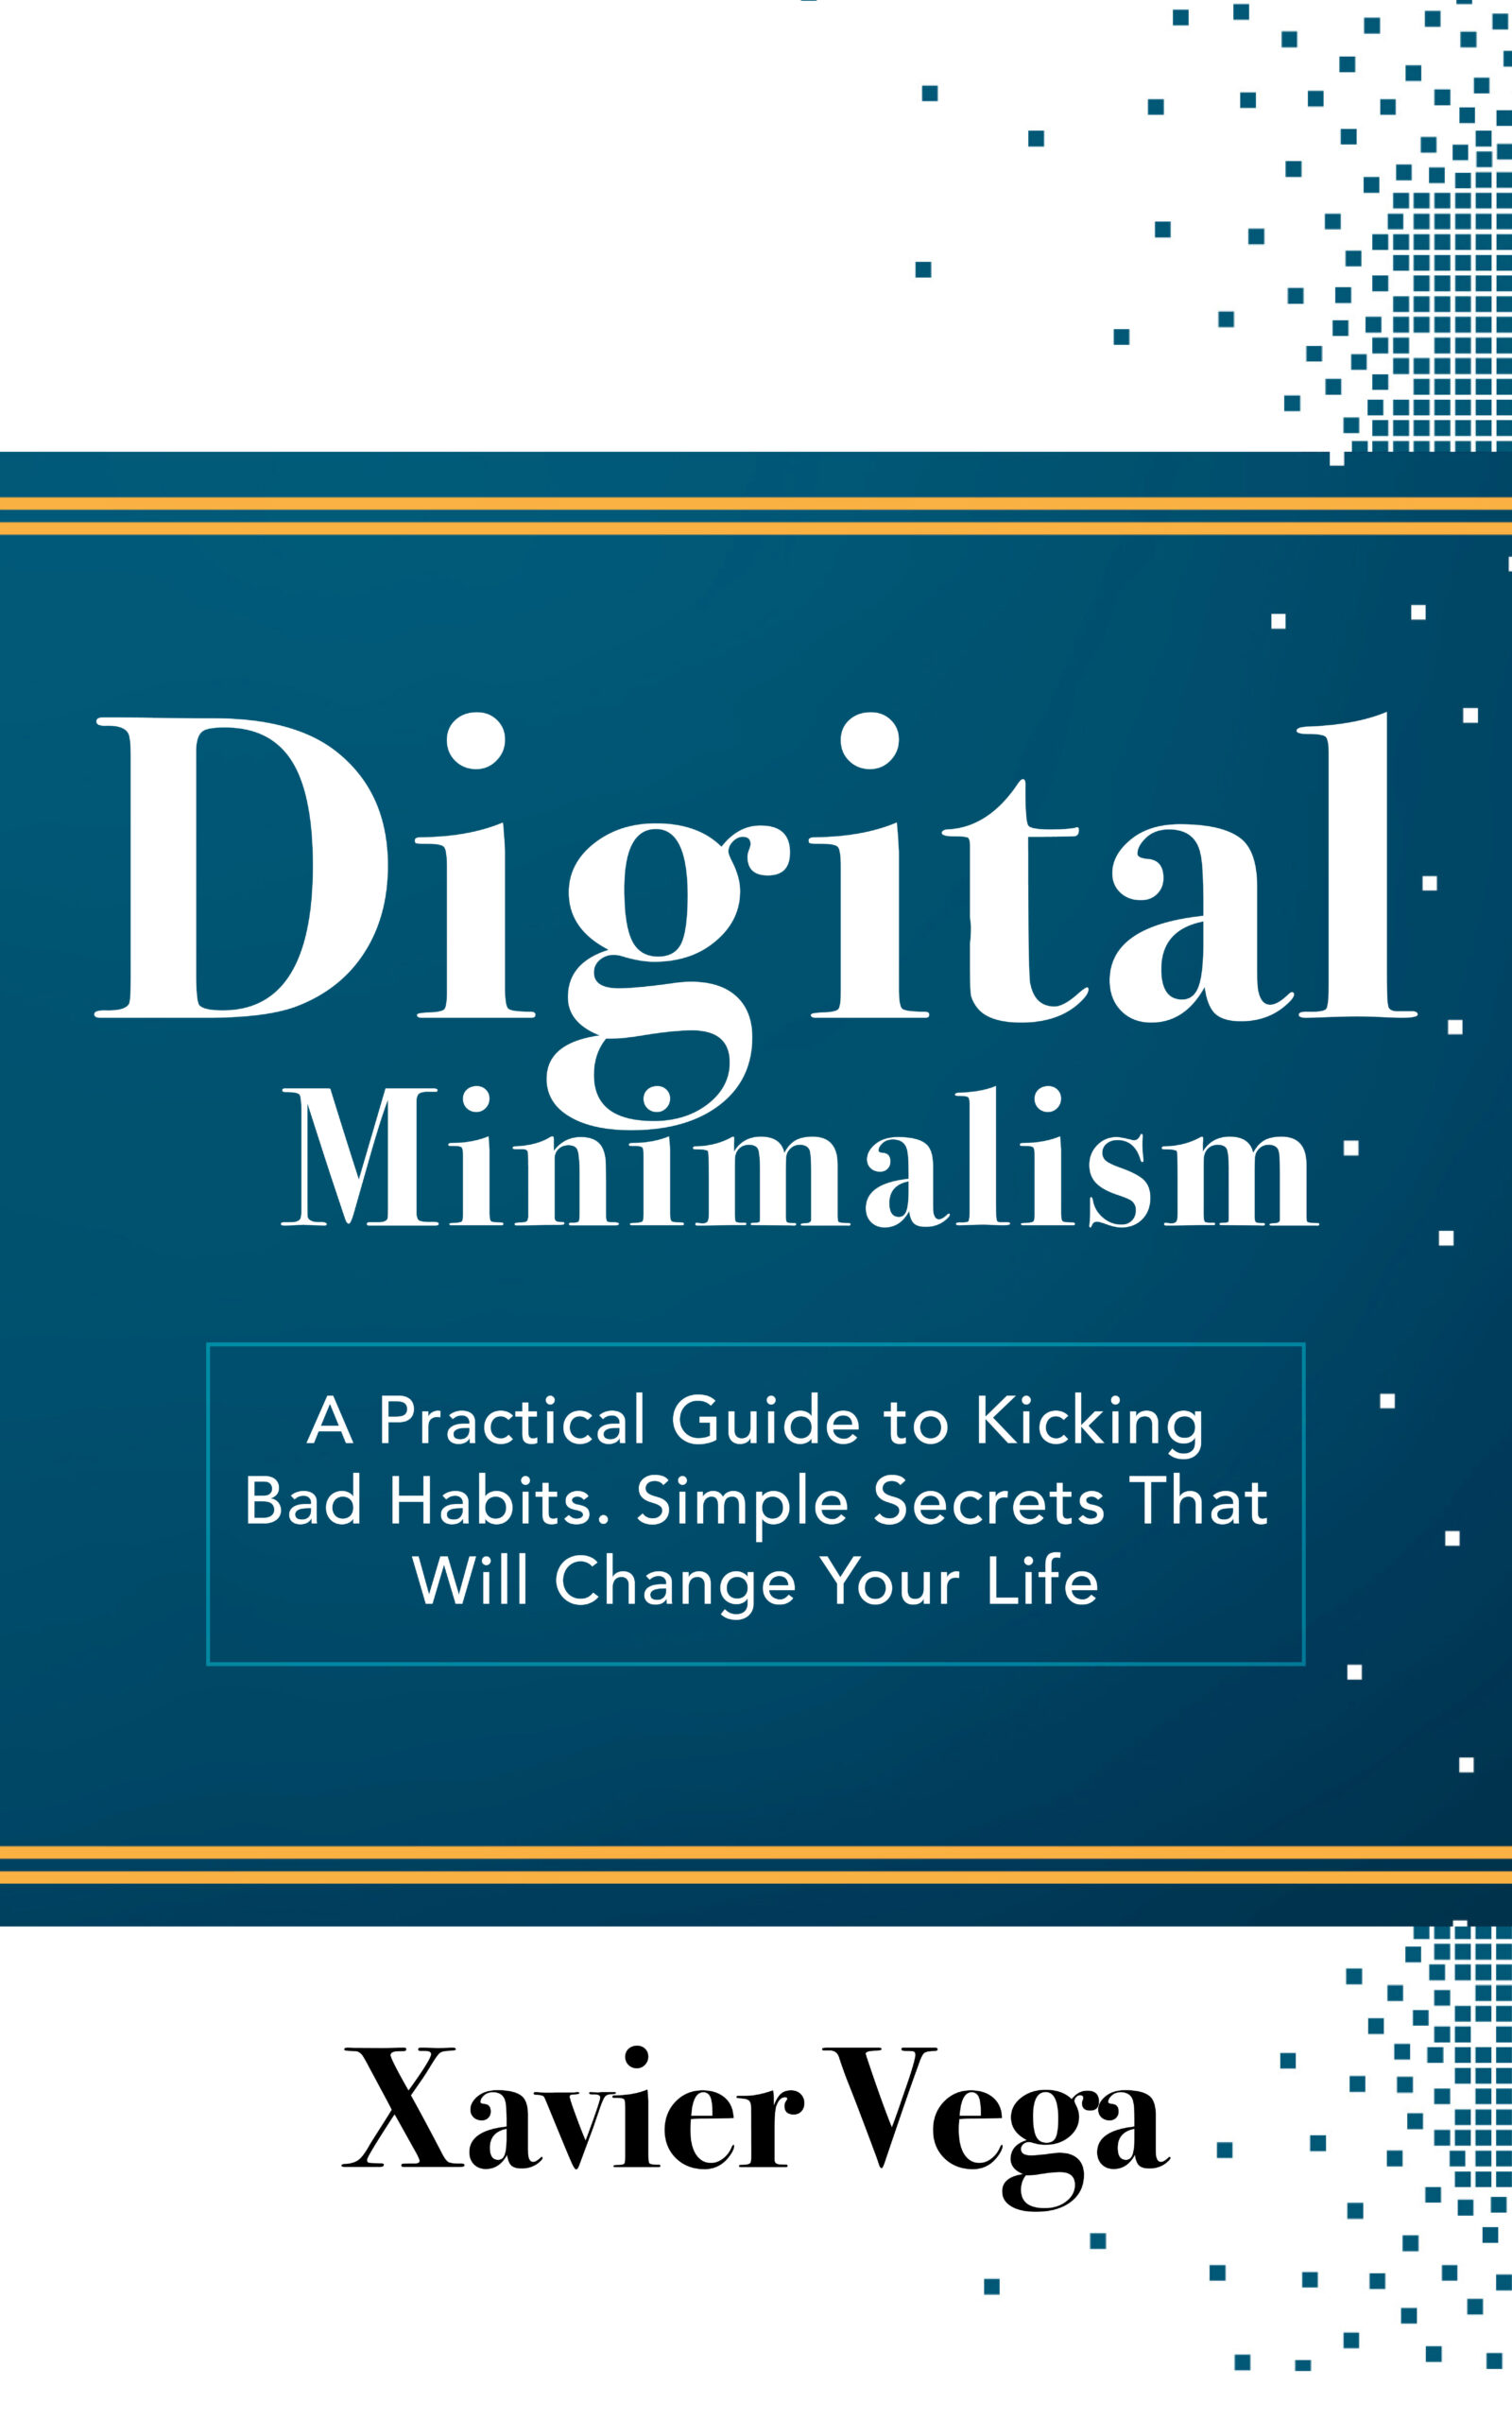 FREE: Digital Minimalism A Practical Guide to Kicking Bad Habits. Simple Secrets That Will Change Your Life by Xavier Vega